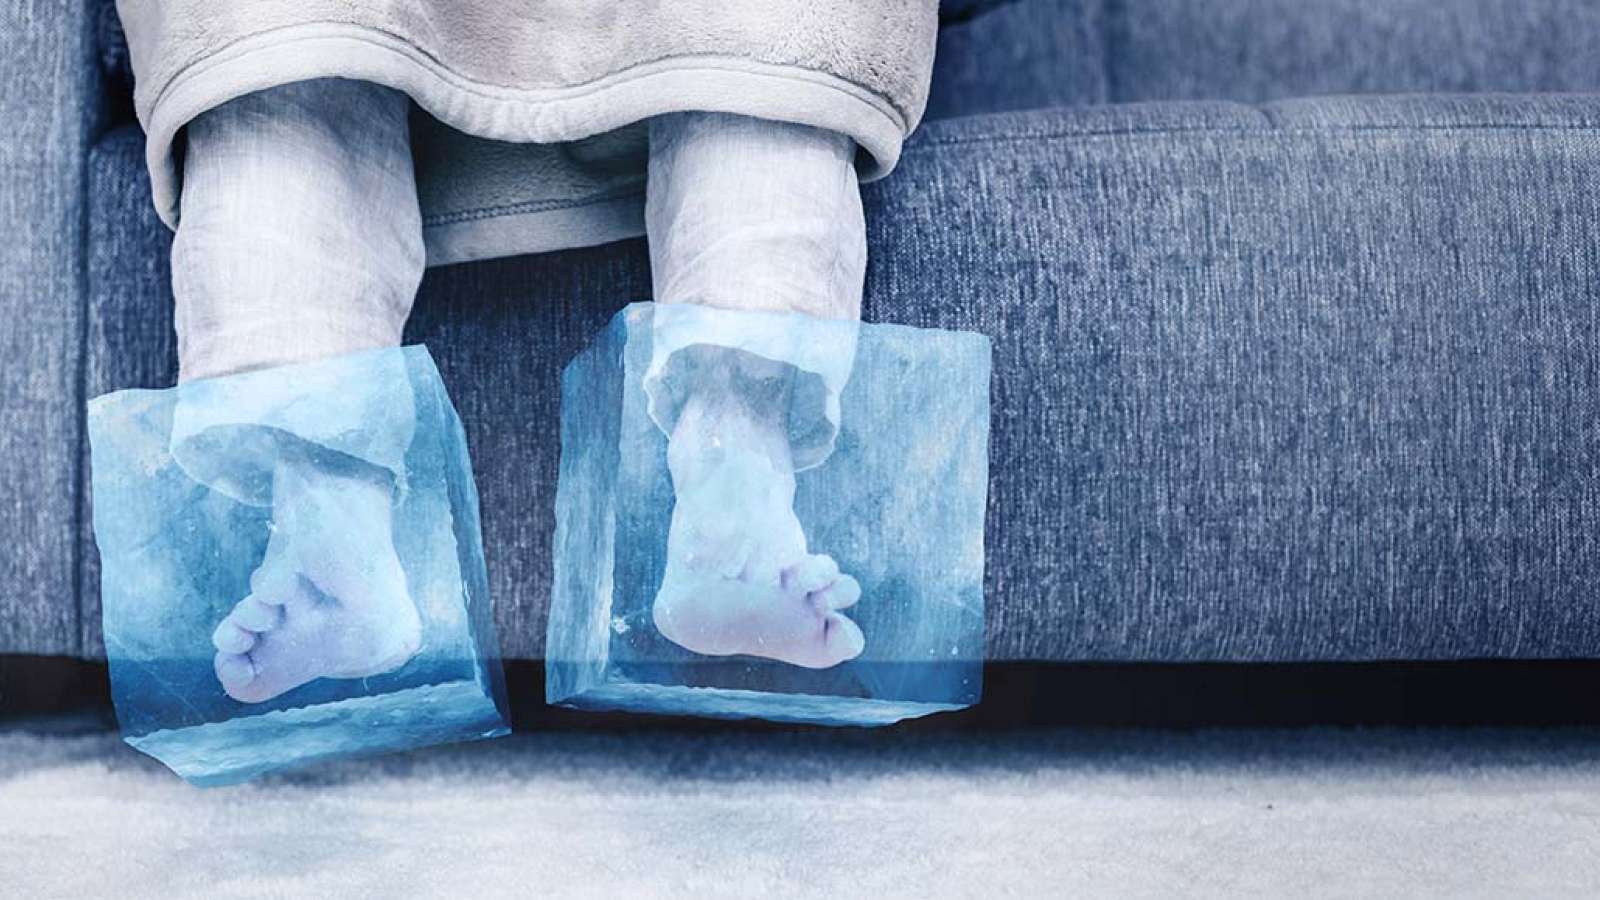 Feet in ice cubes